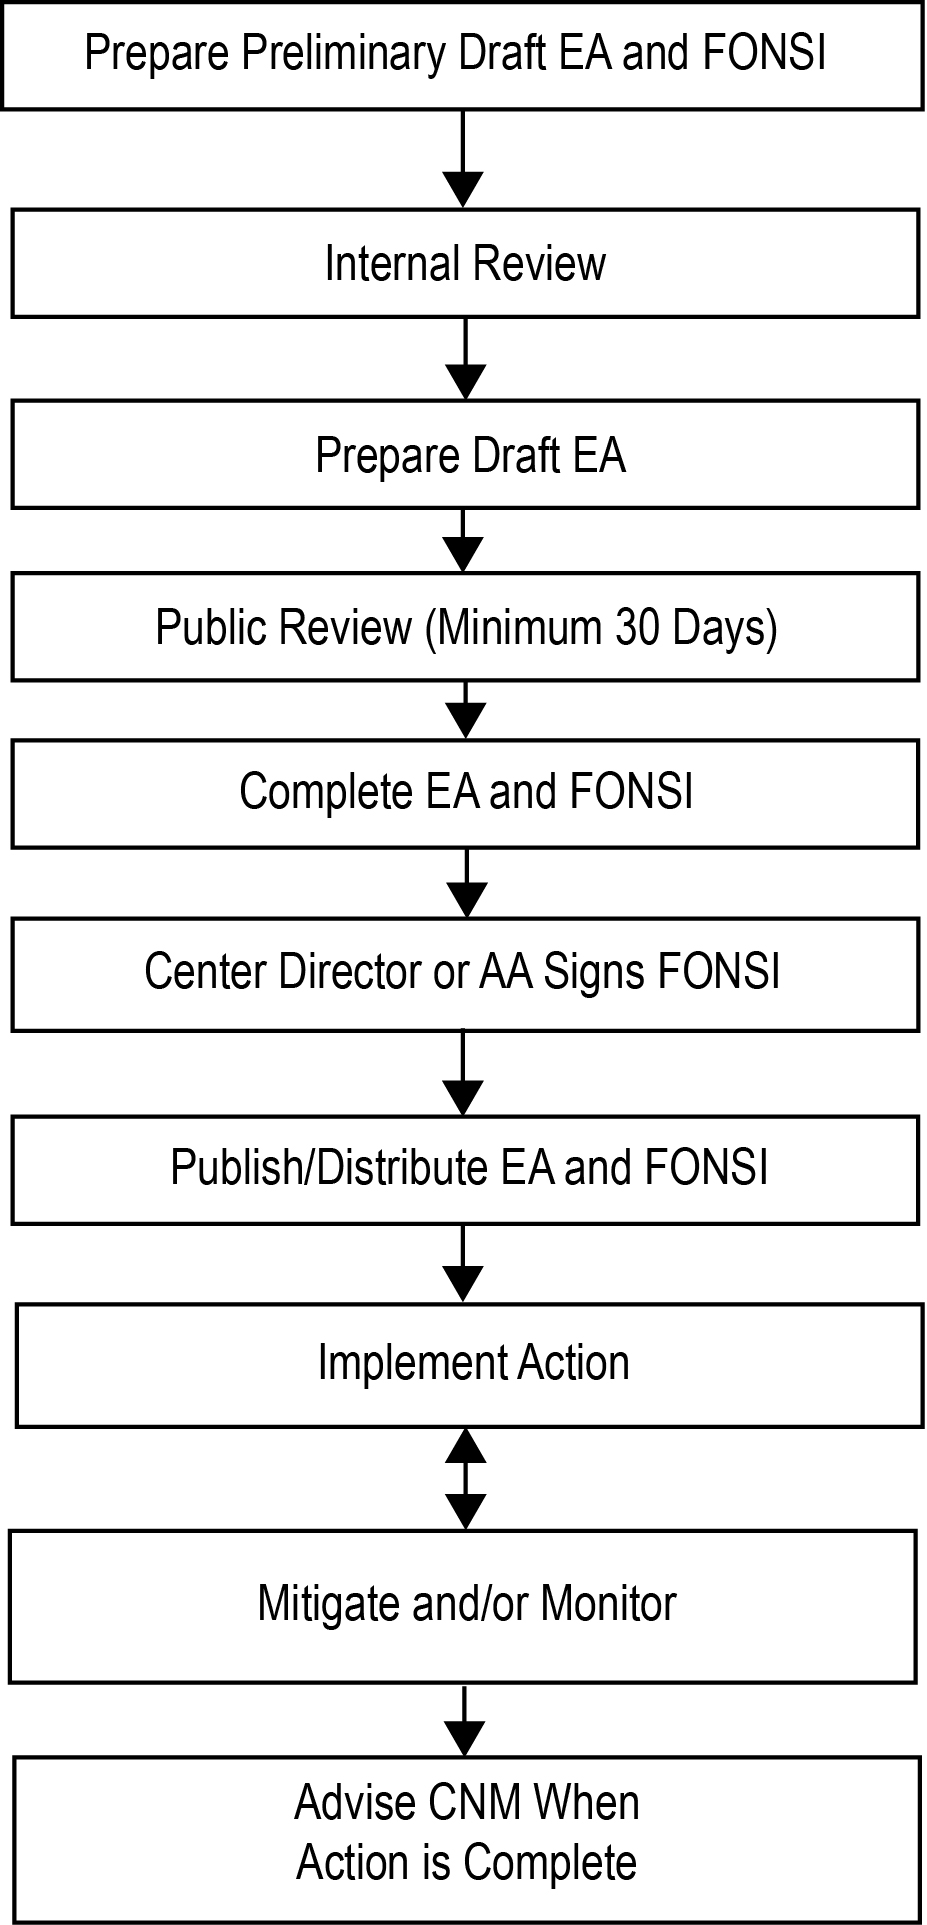 Appendix D flow charts depict the NEPA Process. Figure D-3 show the Summary of Typical Environmental Assessment Process
(Assumes EA Will Lead to FONSI)